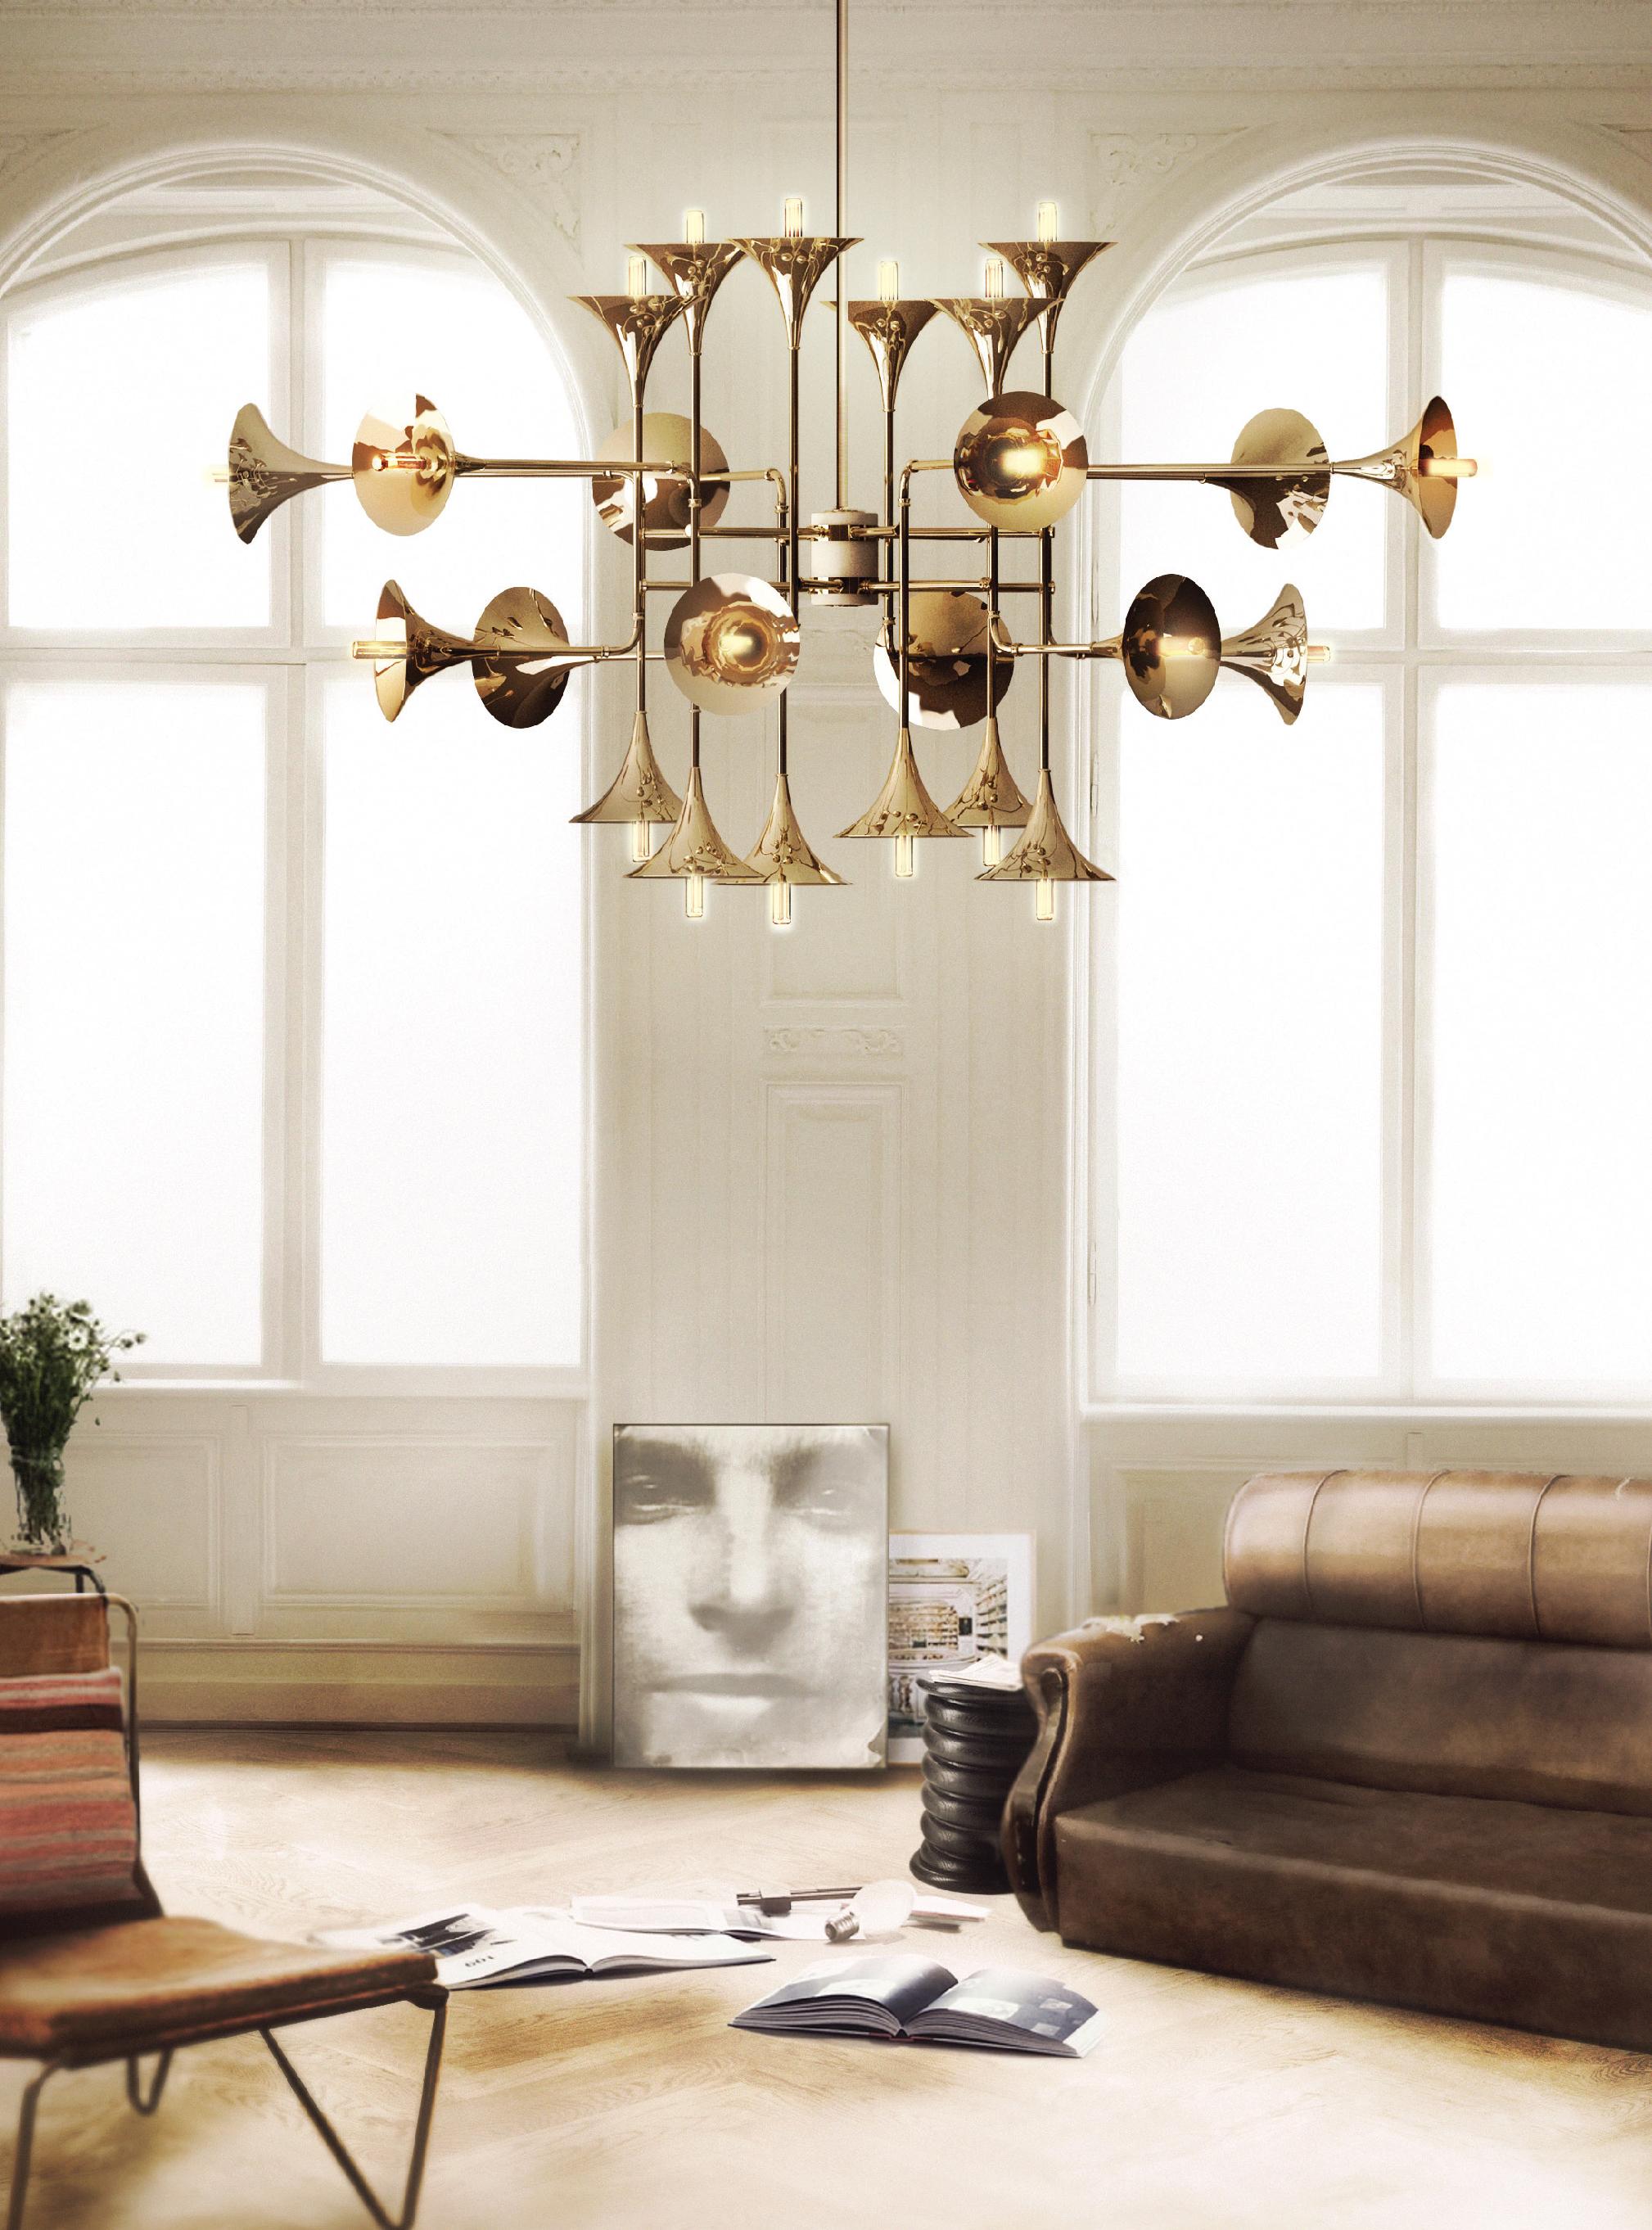 Botti modern chandelier instantly takes us into a music concert starring Chris Botti. The midcentury lighting design was inspired by the American trumpet player as a tribute to jazz music. With a structure handmade in brass and boasting a